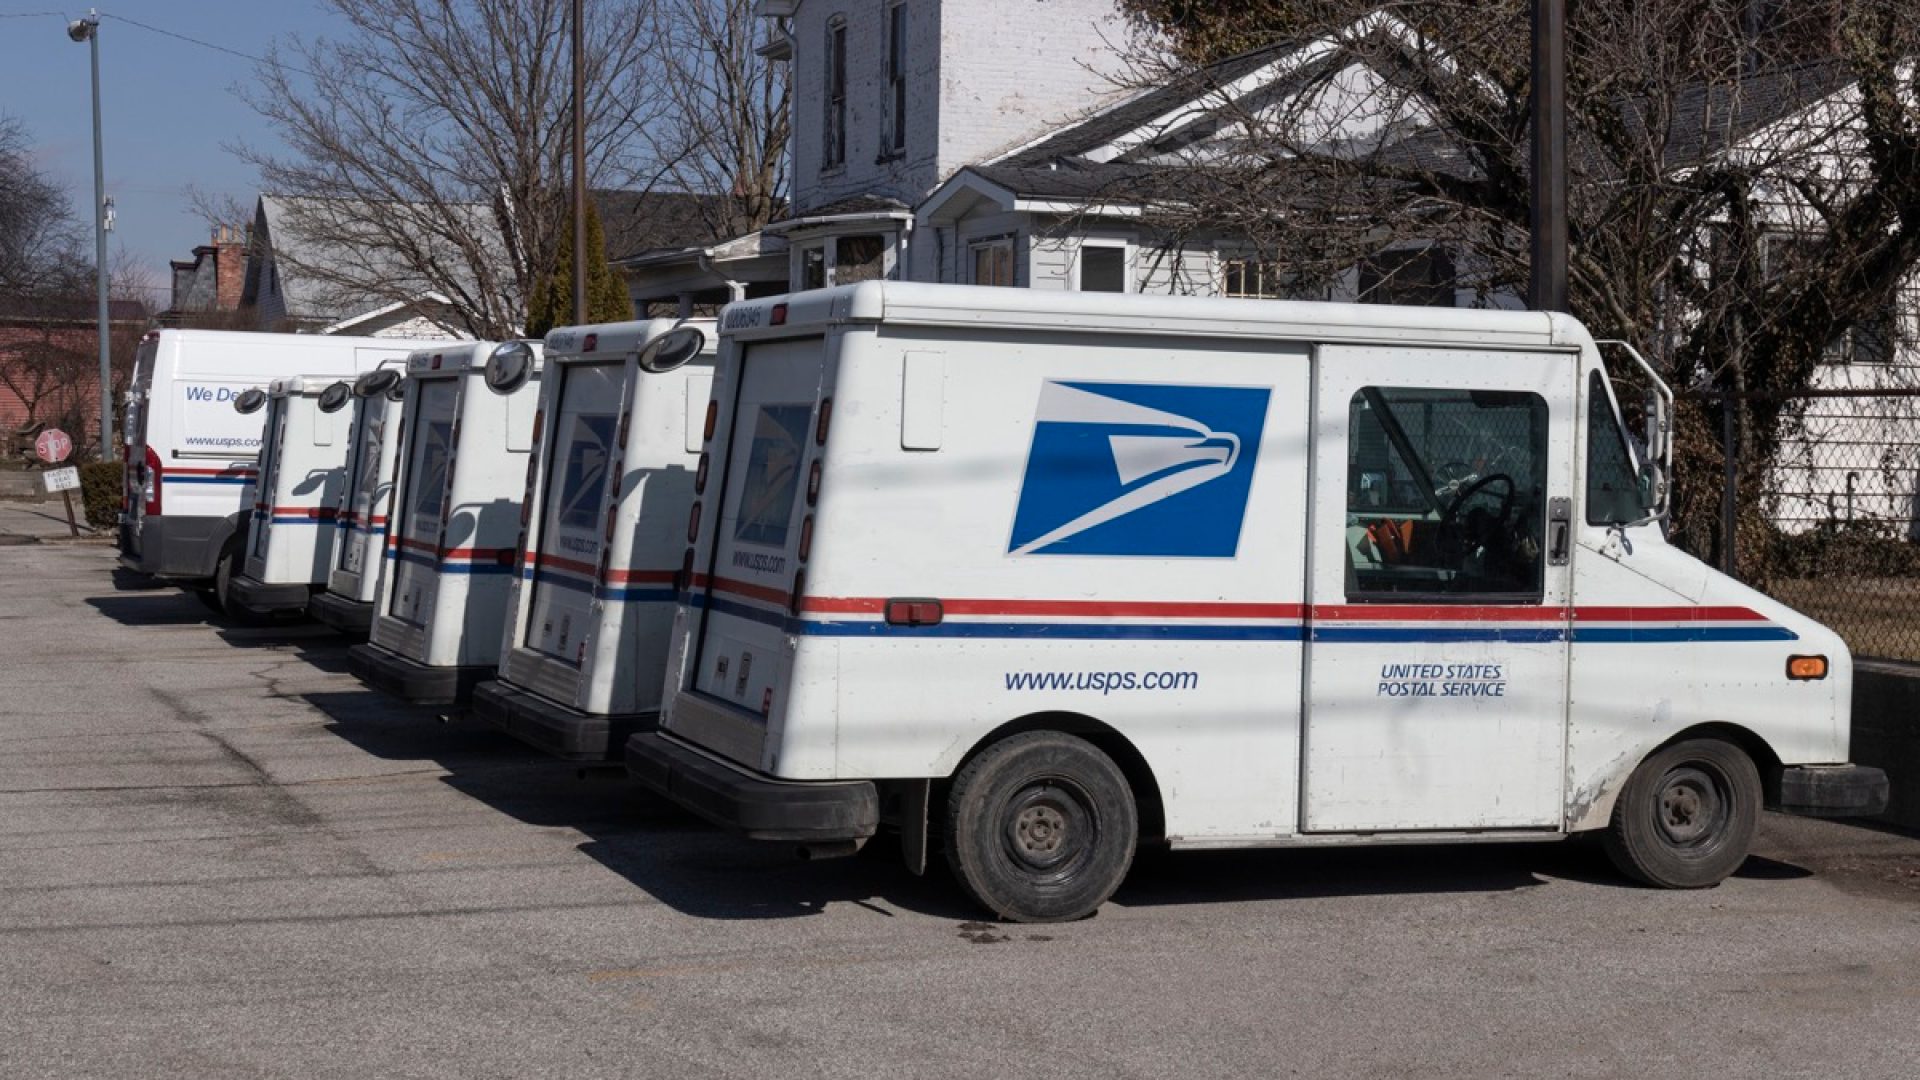 USPS Is Suspending Services Here "Due to Safety Issues"